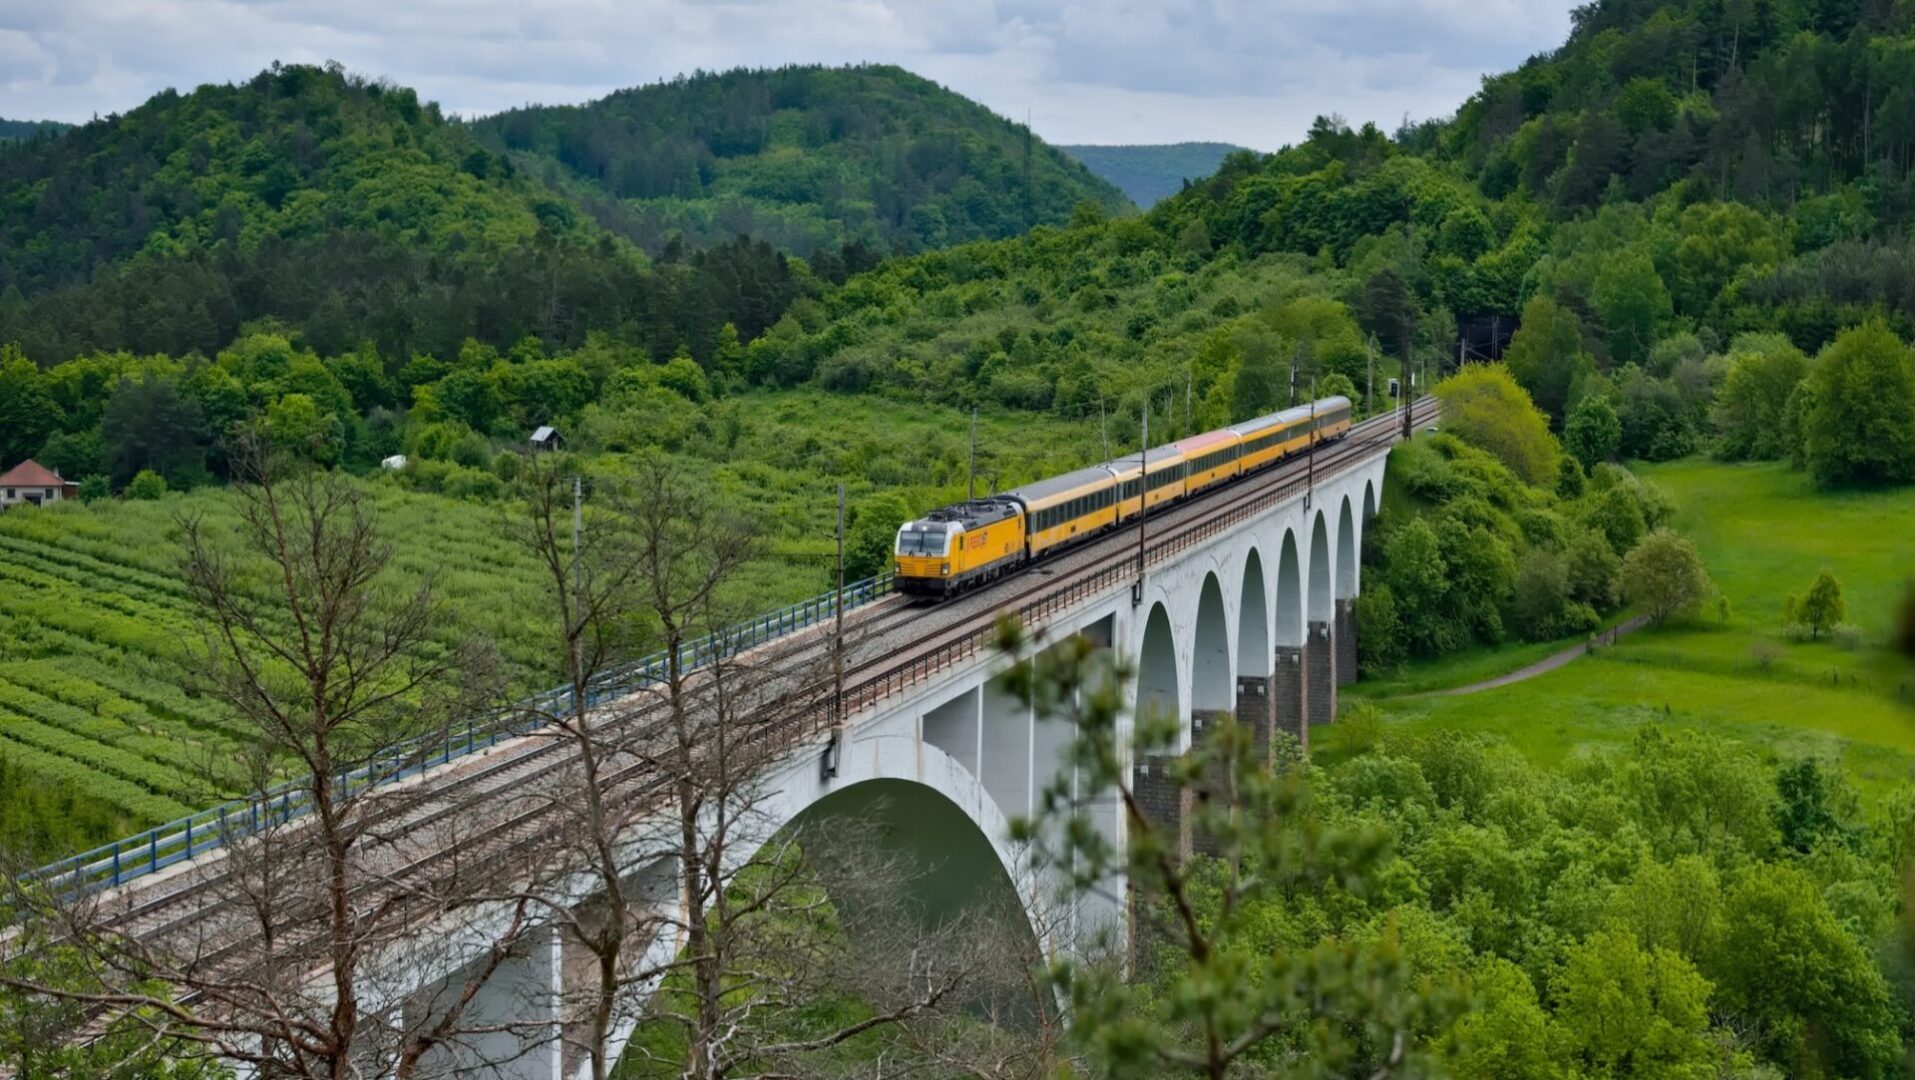 A train is traveling on the tracks over a bridge.